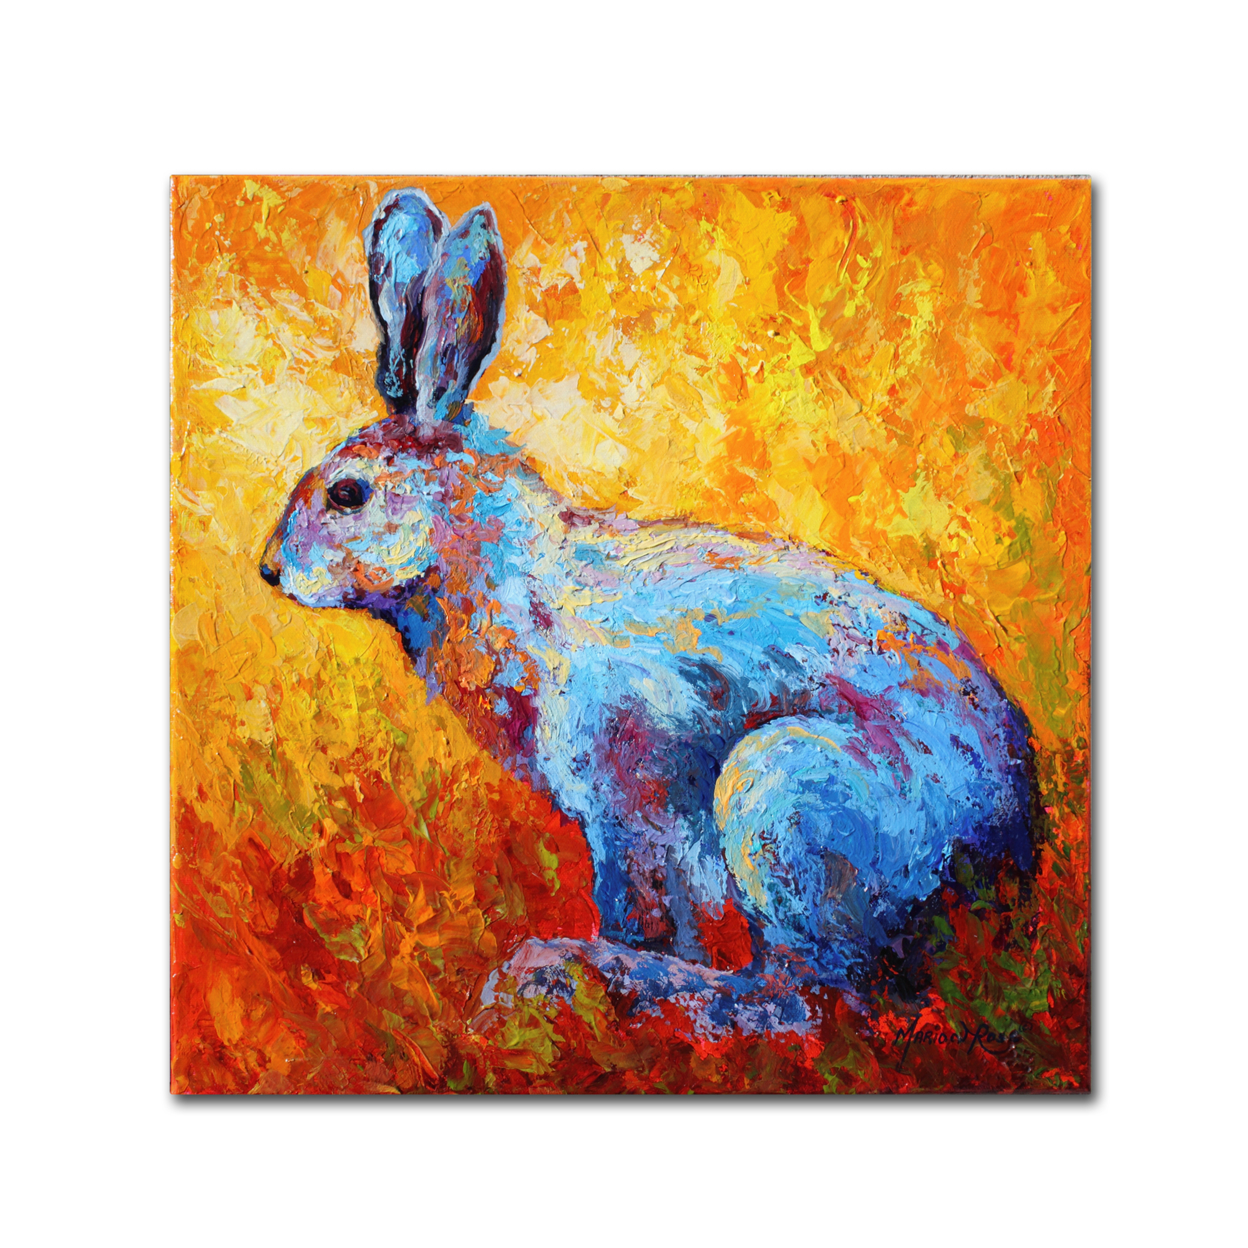 Marion Rose 'Bunnie (krabbit)' Ready To Hang Canvas Art 18 X 18 Inches Made In USA